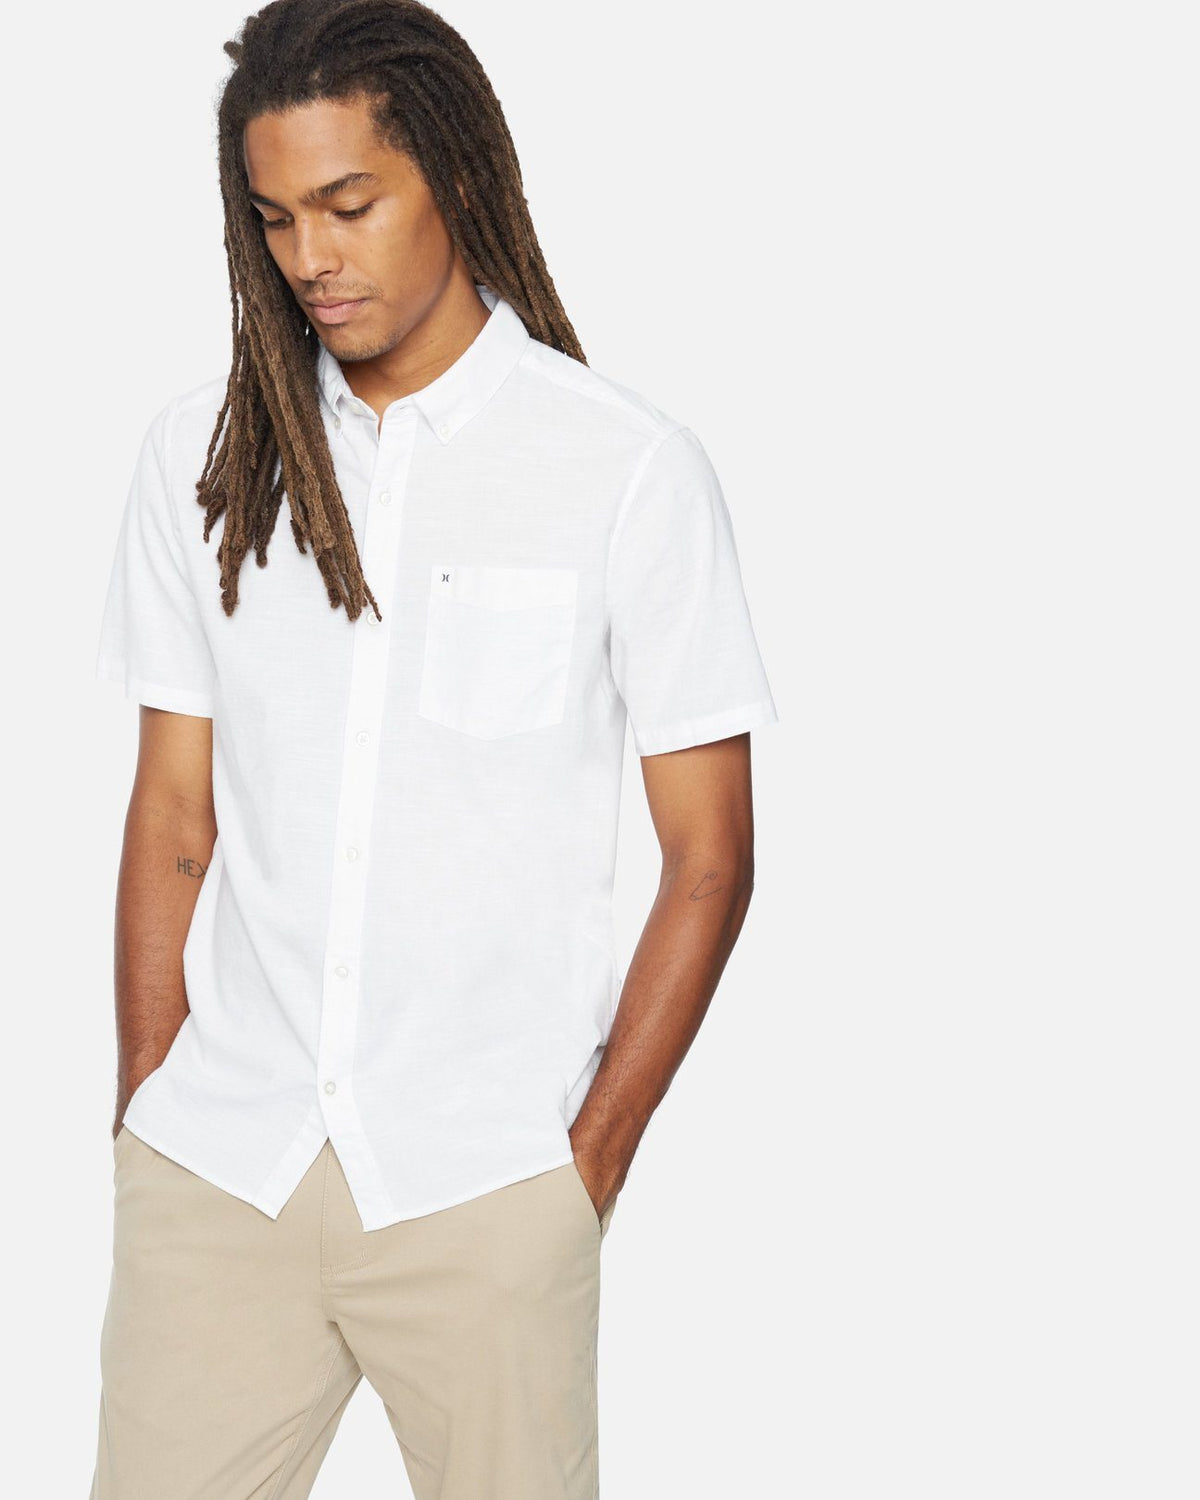 ONE & ONLY 2.0 S/S BUTTON UP SHIRT (White)